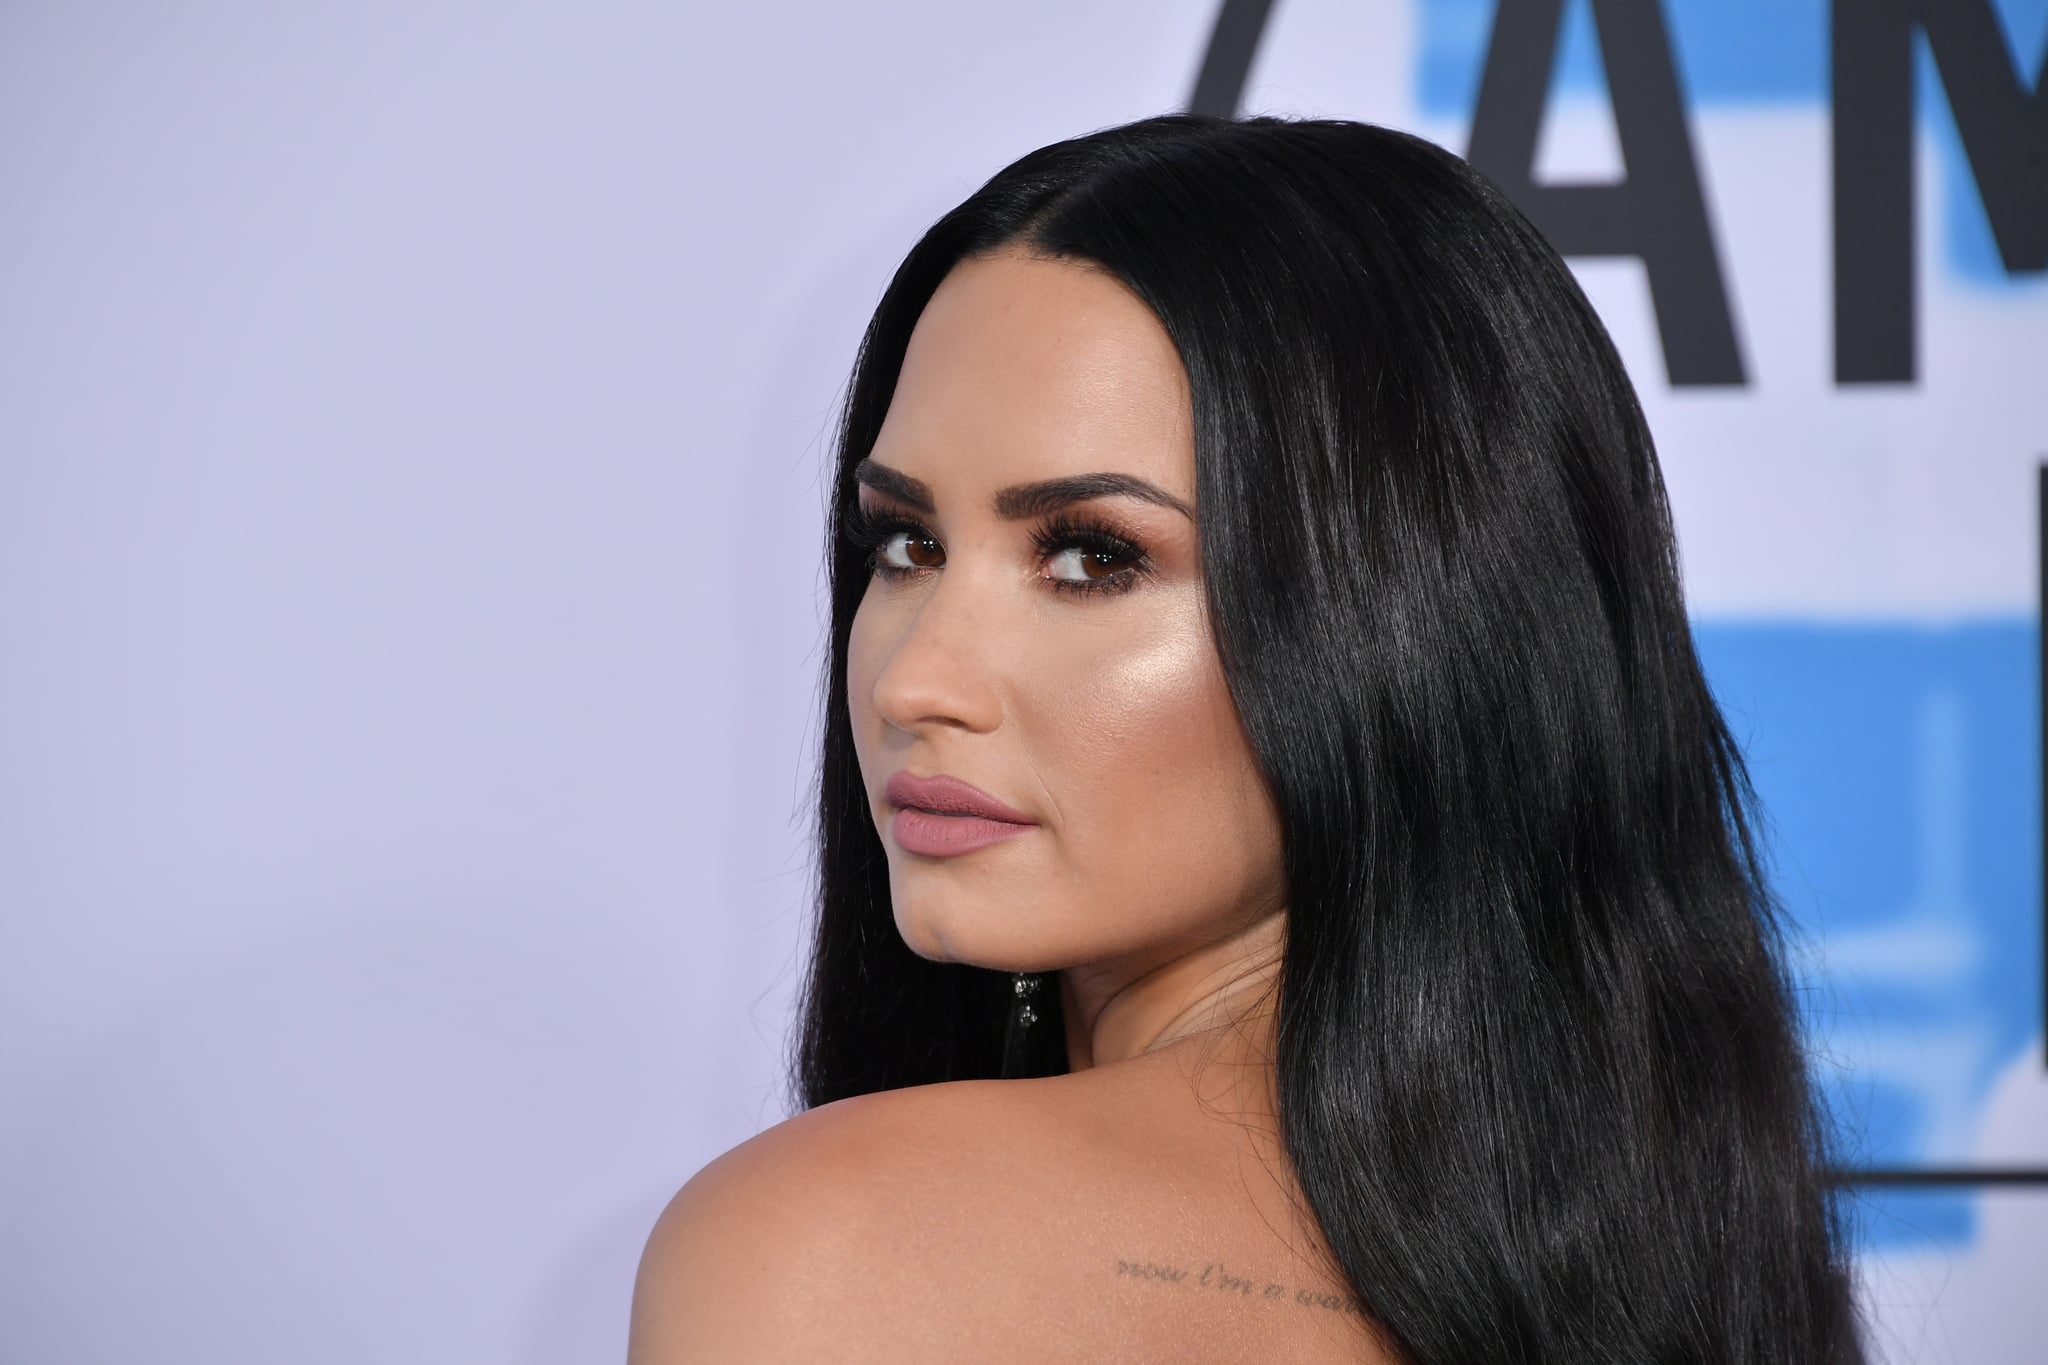 LOS ANGELES, CA - NOVEMBER 19:  Demi Lovato attends the 2017 American Music Awards at Microsoft theatre on November 19, 2017 in Los Angeles, California.  (Photo by Neilson Barnard/Getty Images)